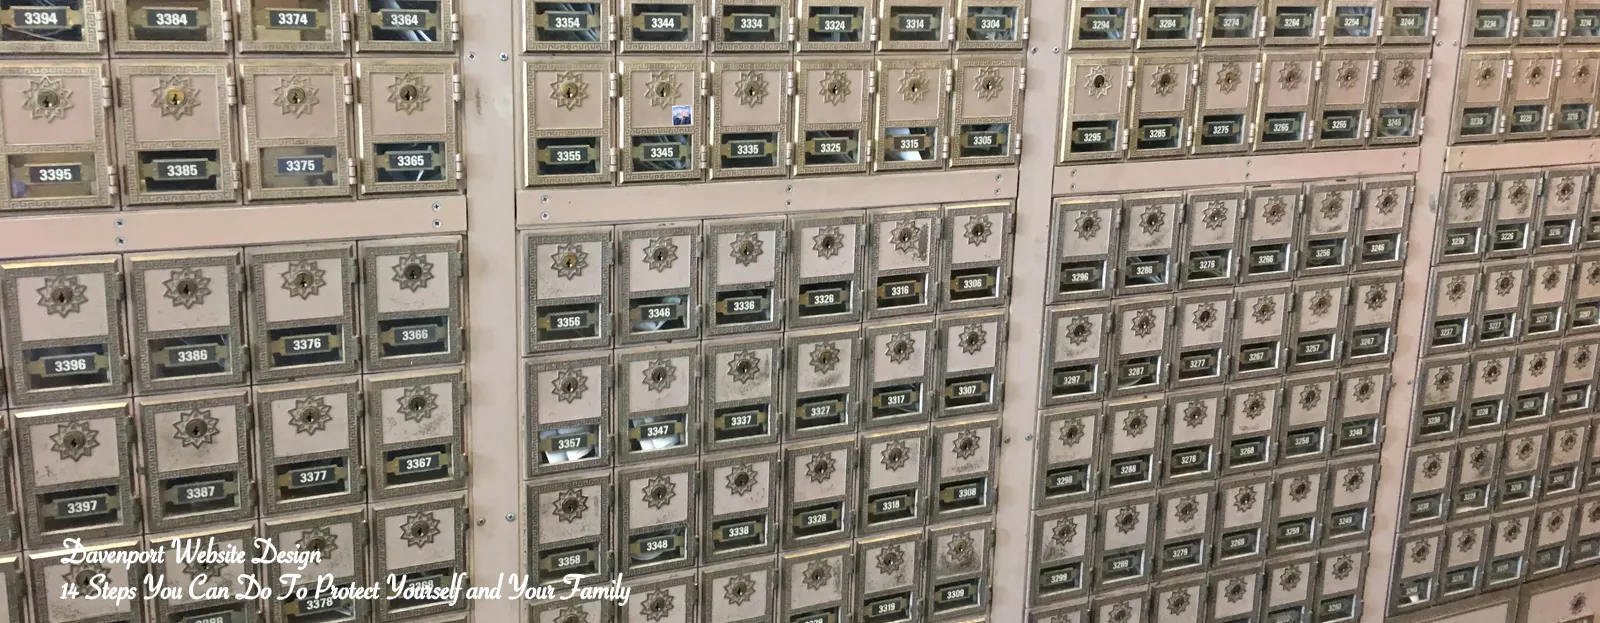 Post Office Boxes in Truckee post office.